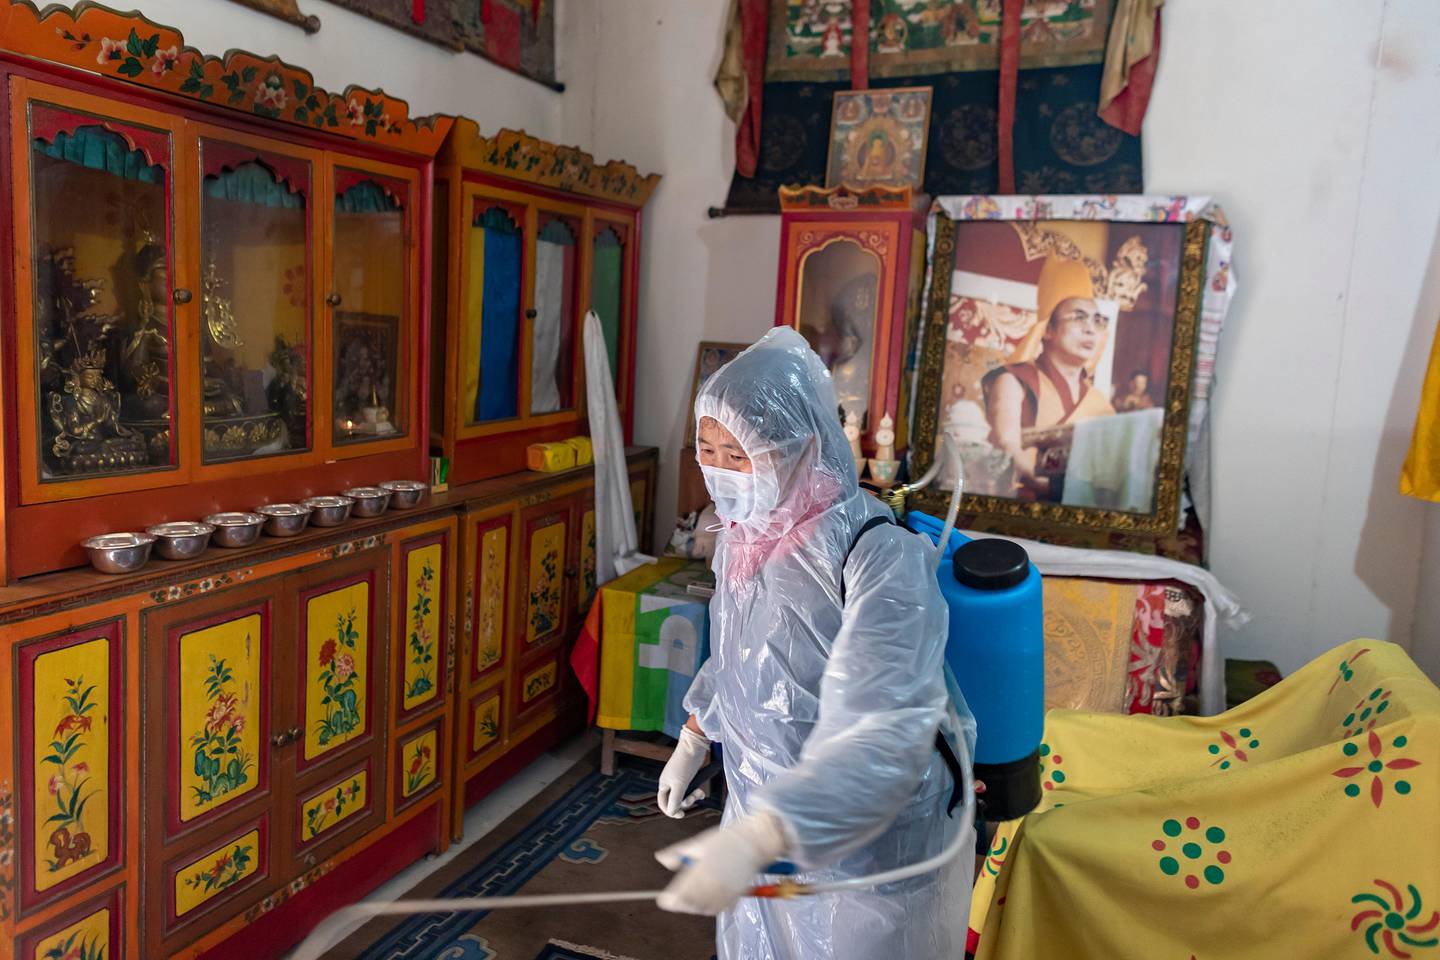 A portrait of the Tibetan spiritual leader the Dalai Lama adorns a prayer room as an employee of the Central Tibetan Administration in protective clothing sprays a steriliser as a precaution against the coronavirus in Dharmsala, India, Thursday, March 19, 2020. For most people, the new coronavirus causes only mild or moderate symptoms. For some it can cause more severe illness. (AP Photo/Ashwini Bhatia)